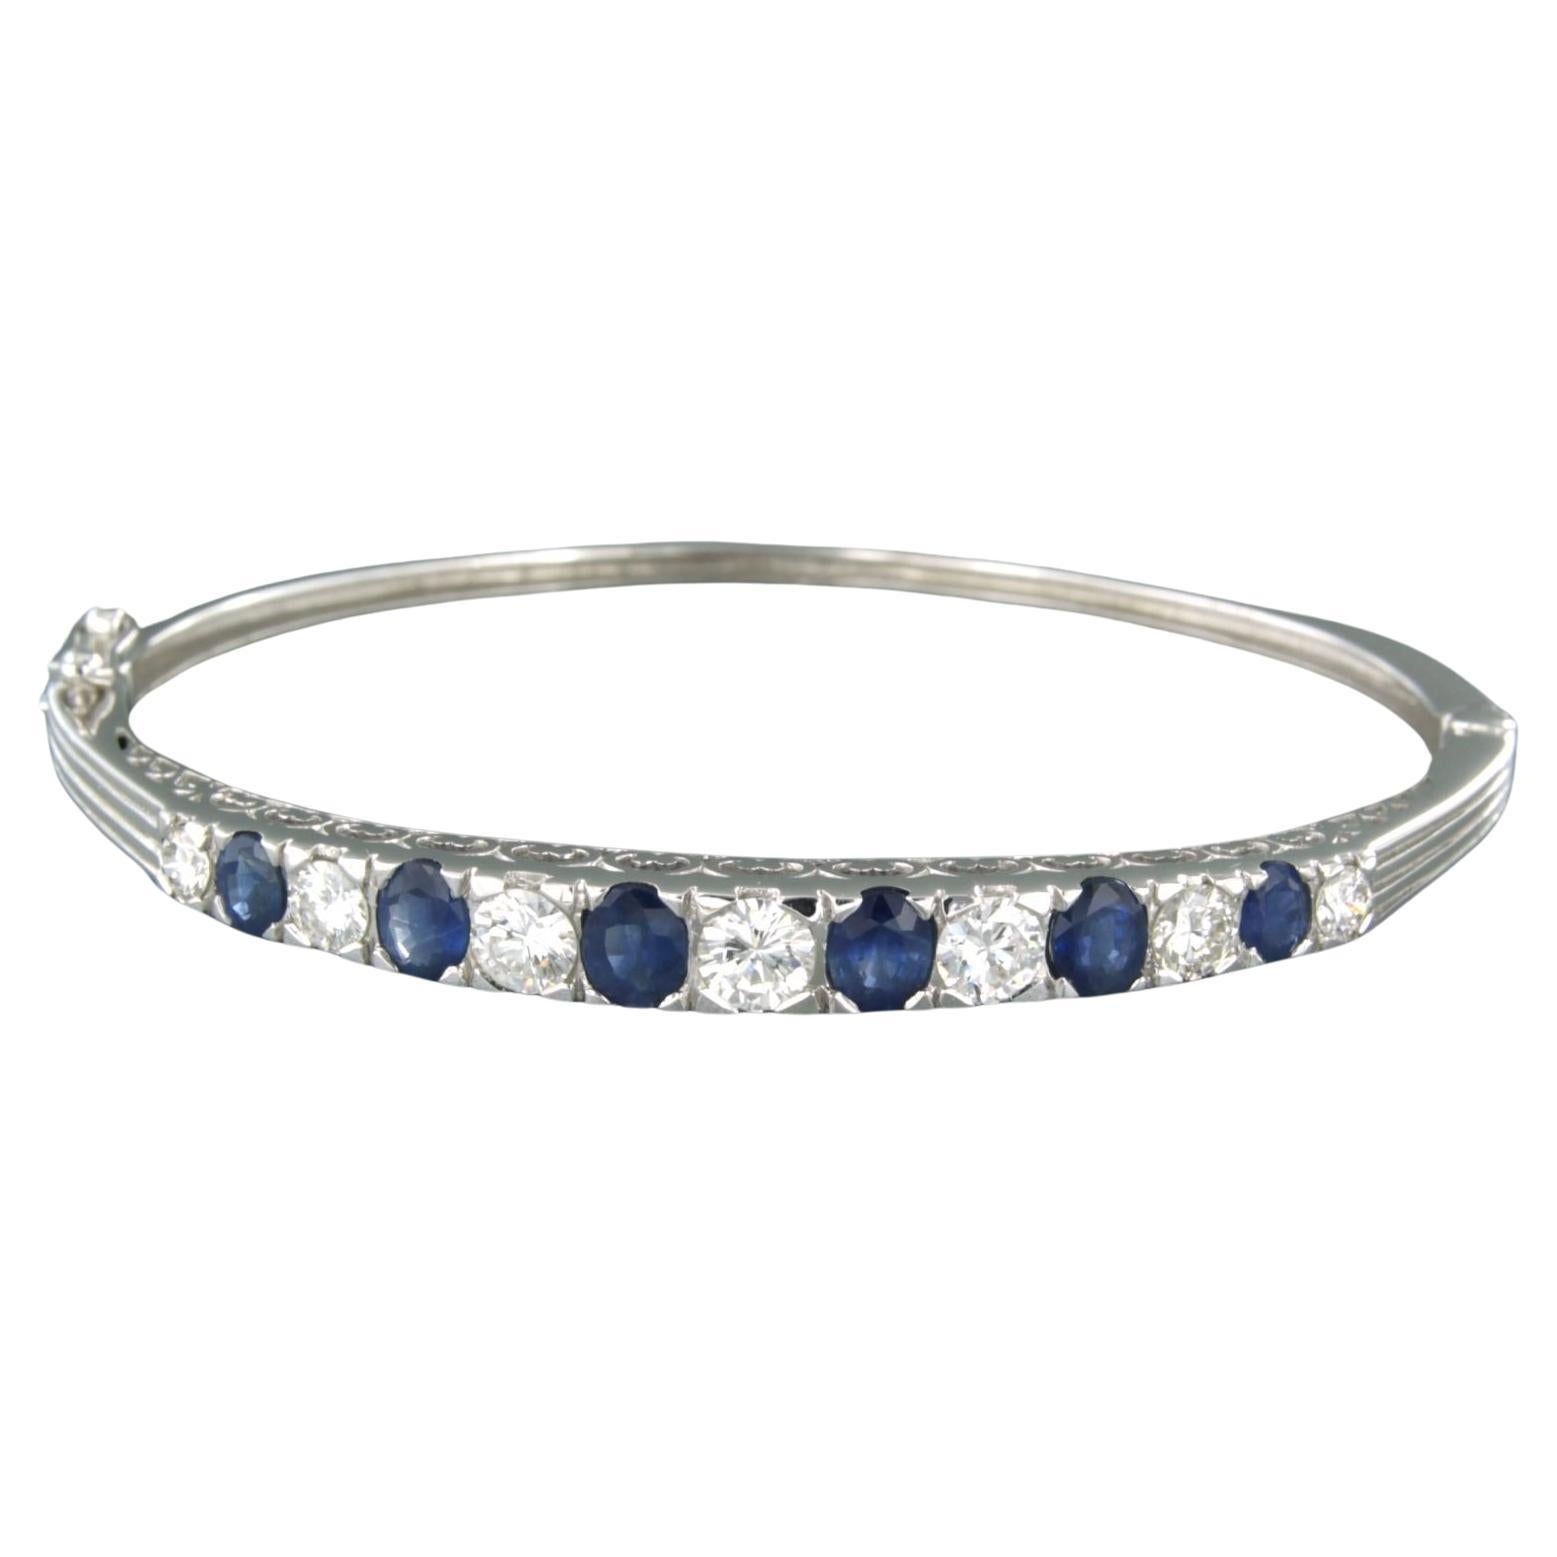 Bracelot with Sapphire and diamonds up to 1.35ct. 14k white gold